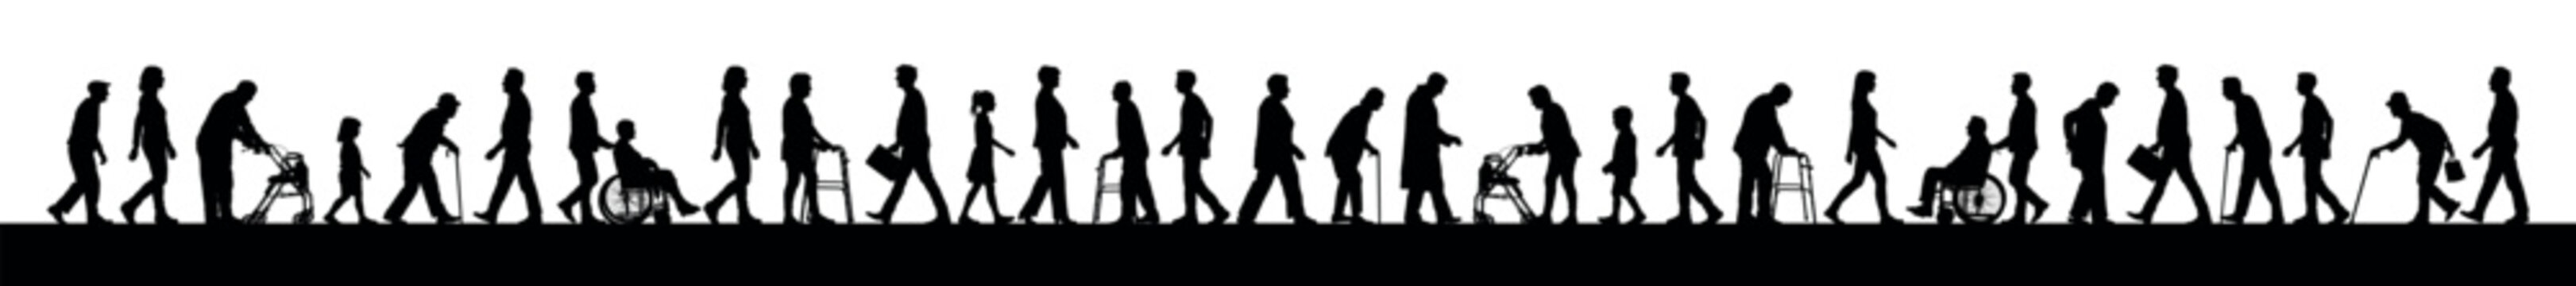 Disabled people with walking aids walking in crowd people street vector infographic silhouette set.